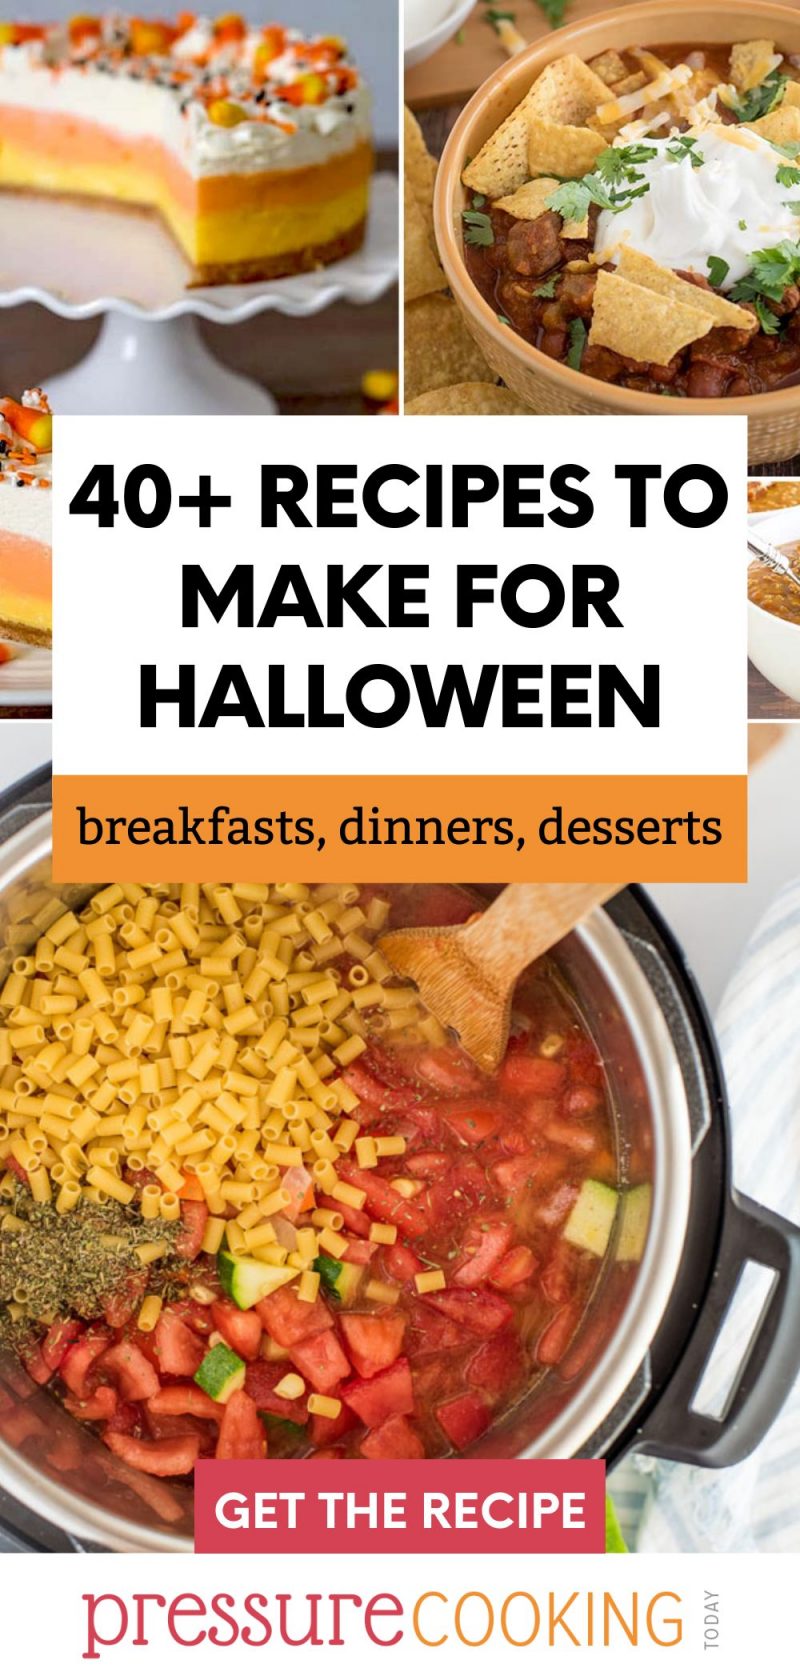 Pinterest button that reads "40+ recipes to make for Halloween: breakfasts, dinners, desserts" over a collage of images including candy corn cheesecake, chili con carne, and Instant Pot soup